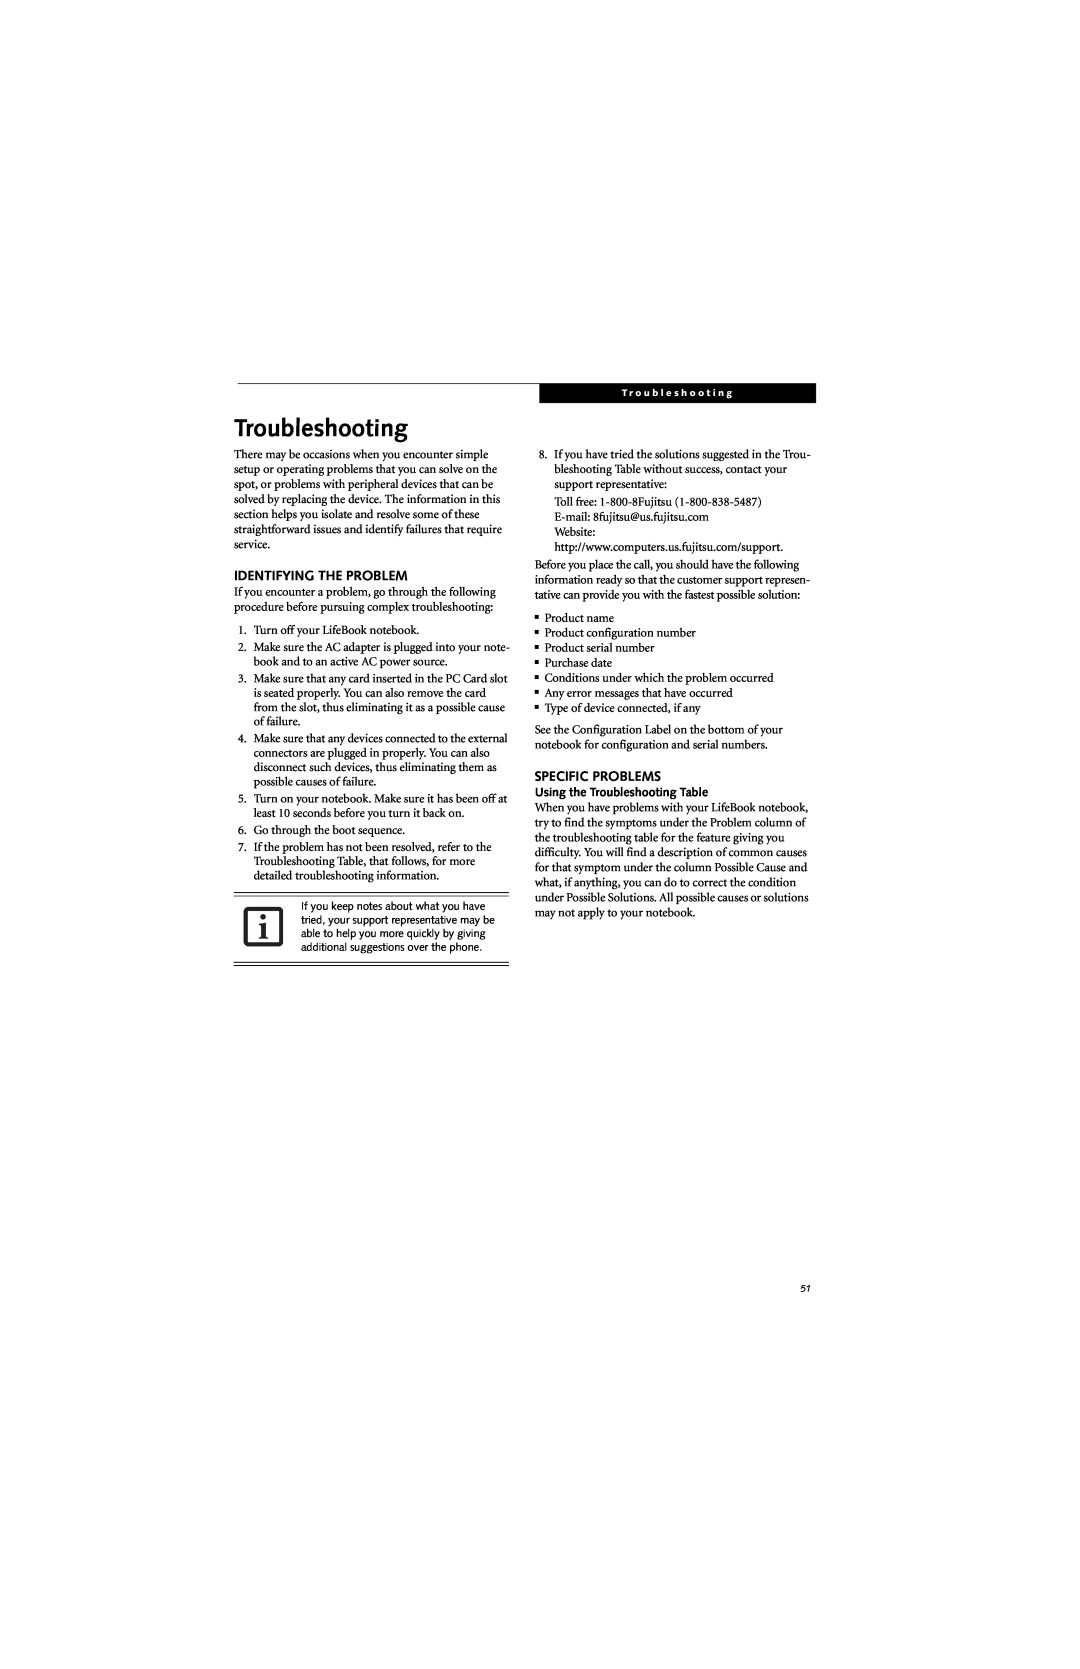 Fujitsu S7210 manual Identifying The Problem, Specific Problems, Using the Troubleshooting Table 